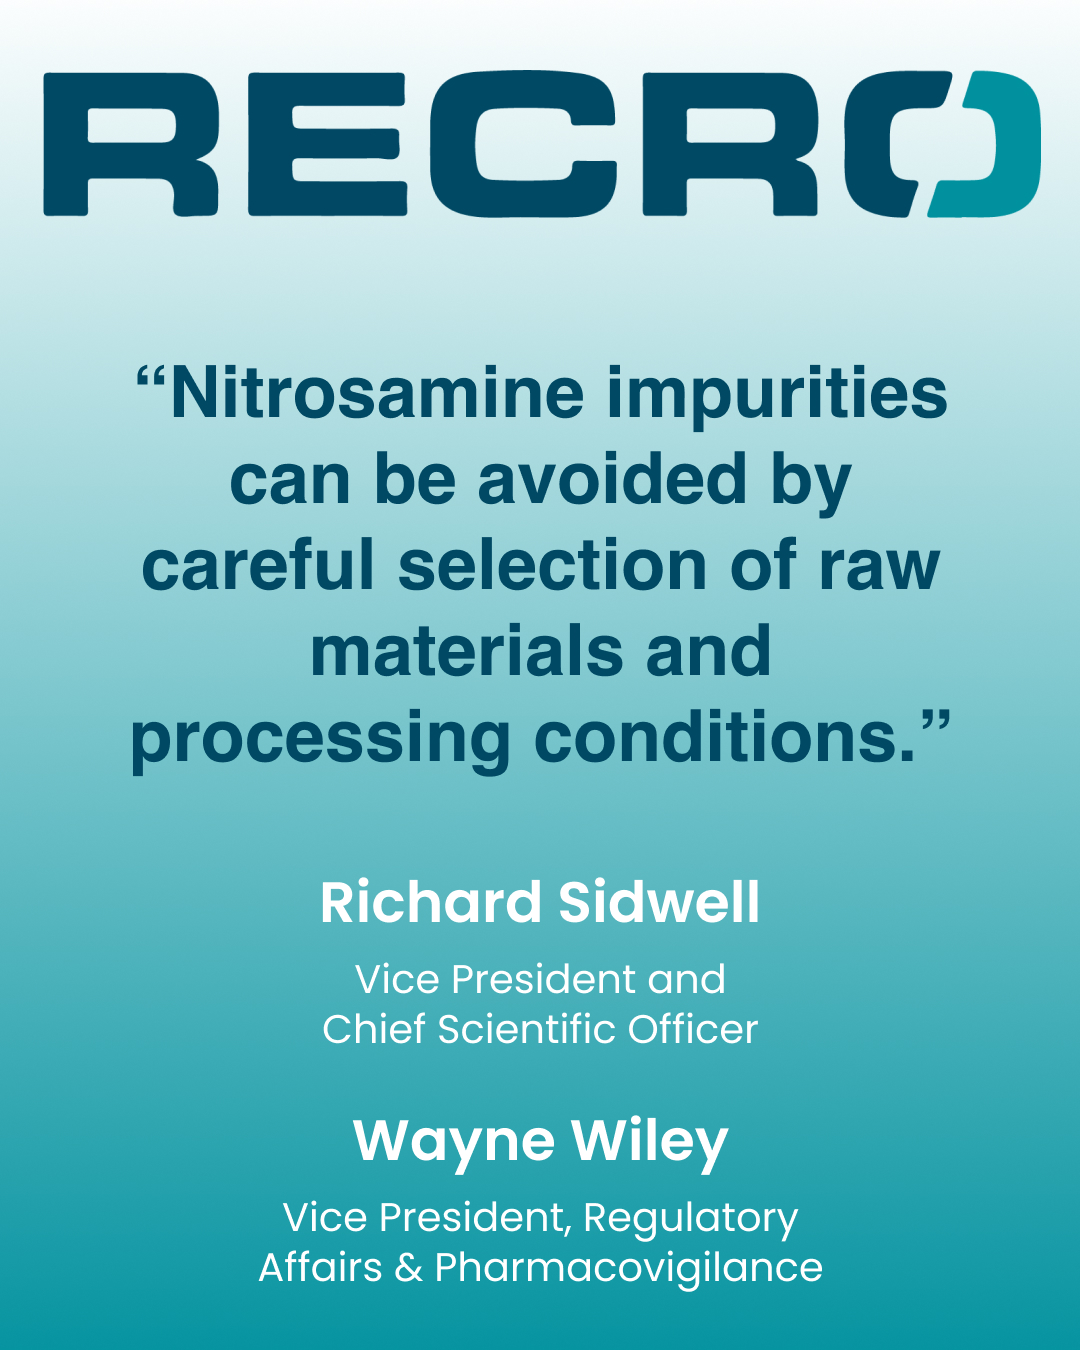 “Nitrosamine impurities can be avoided by careful selection of raw materials and processing conditions.”